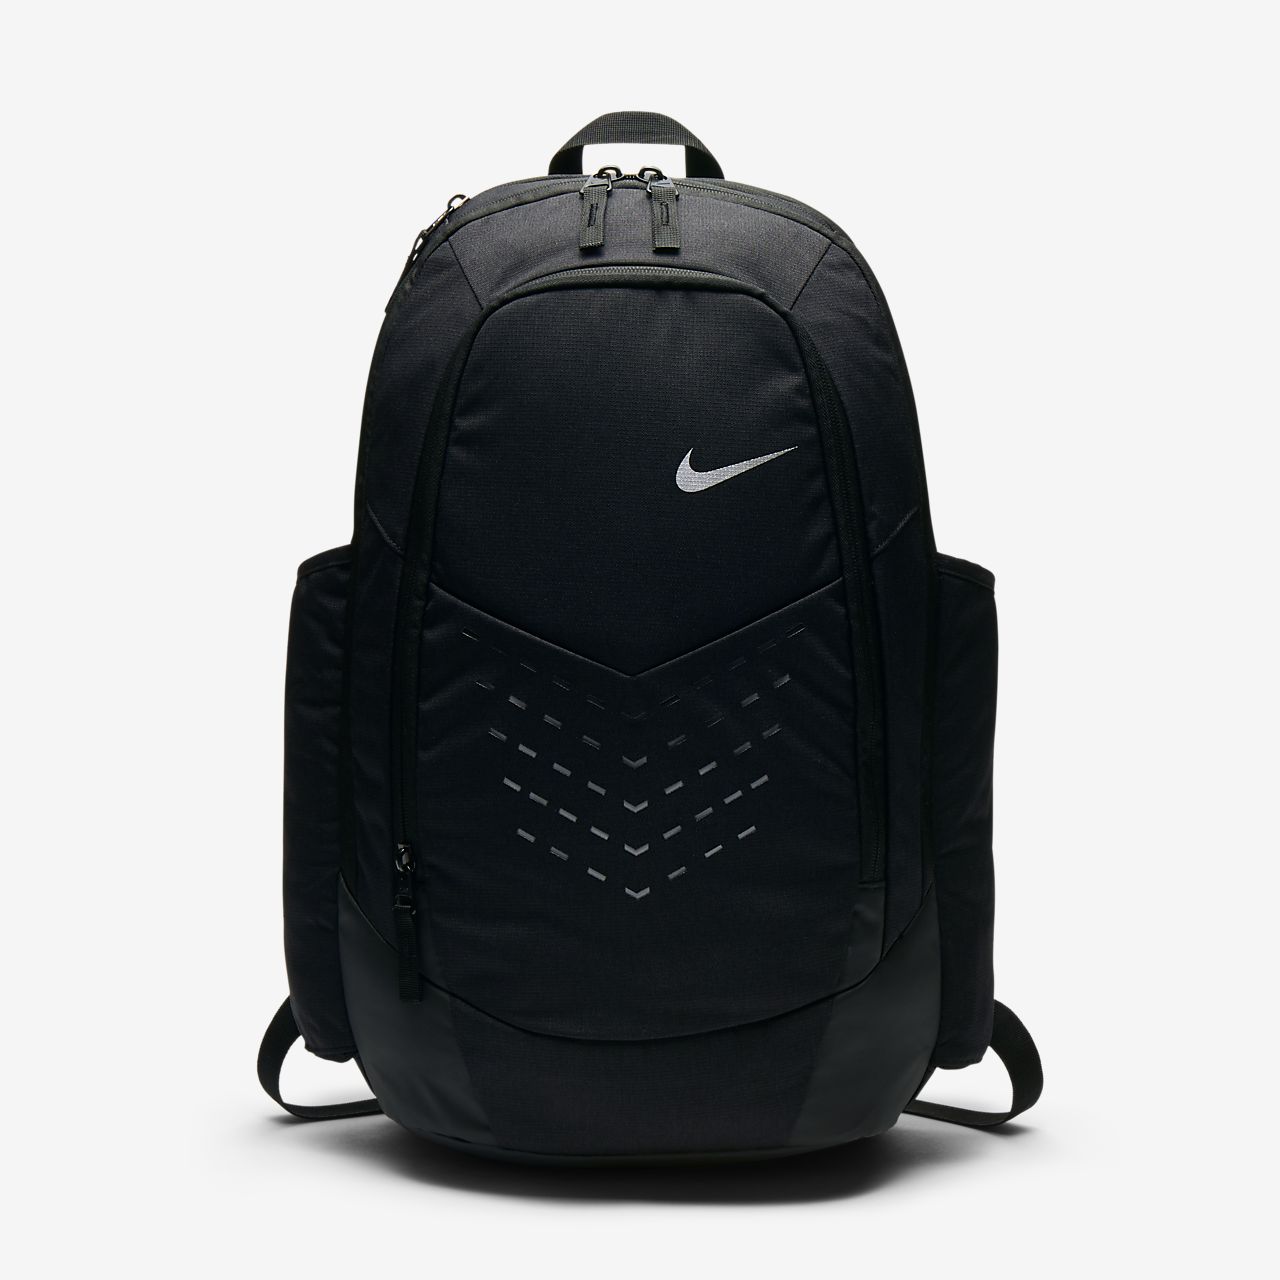 nike backpack with laptop sleeve 